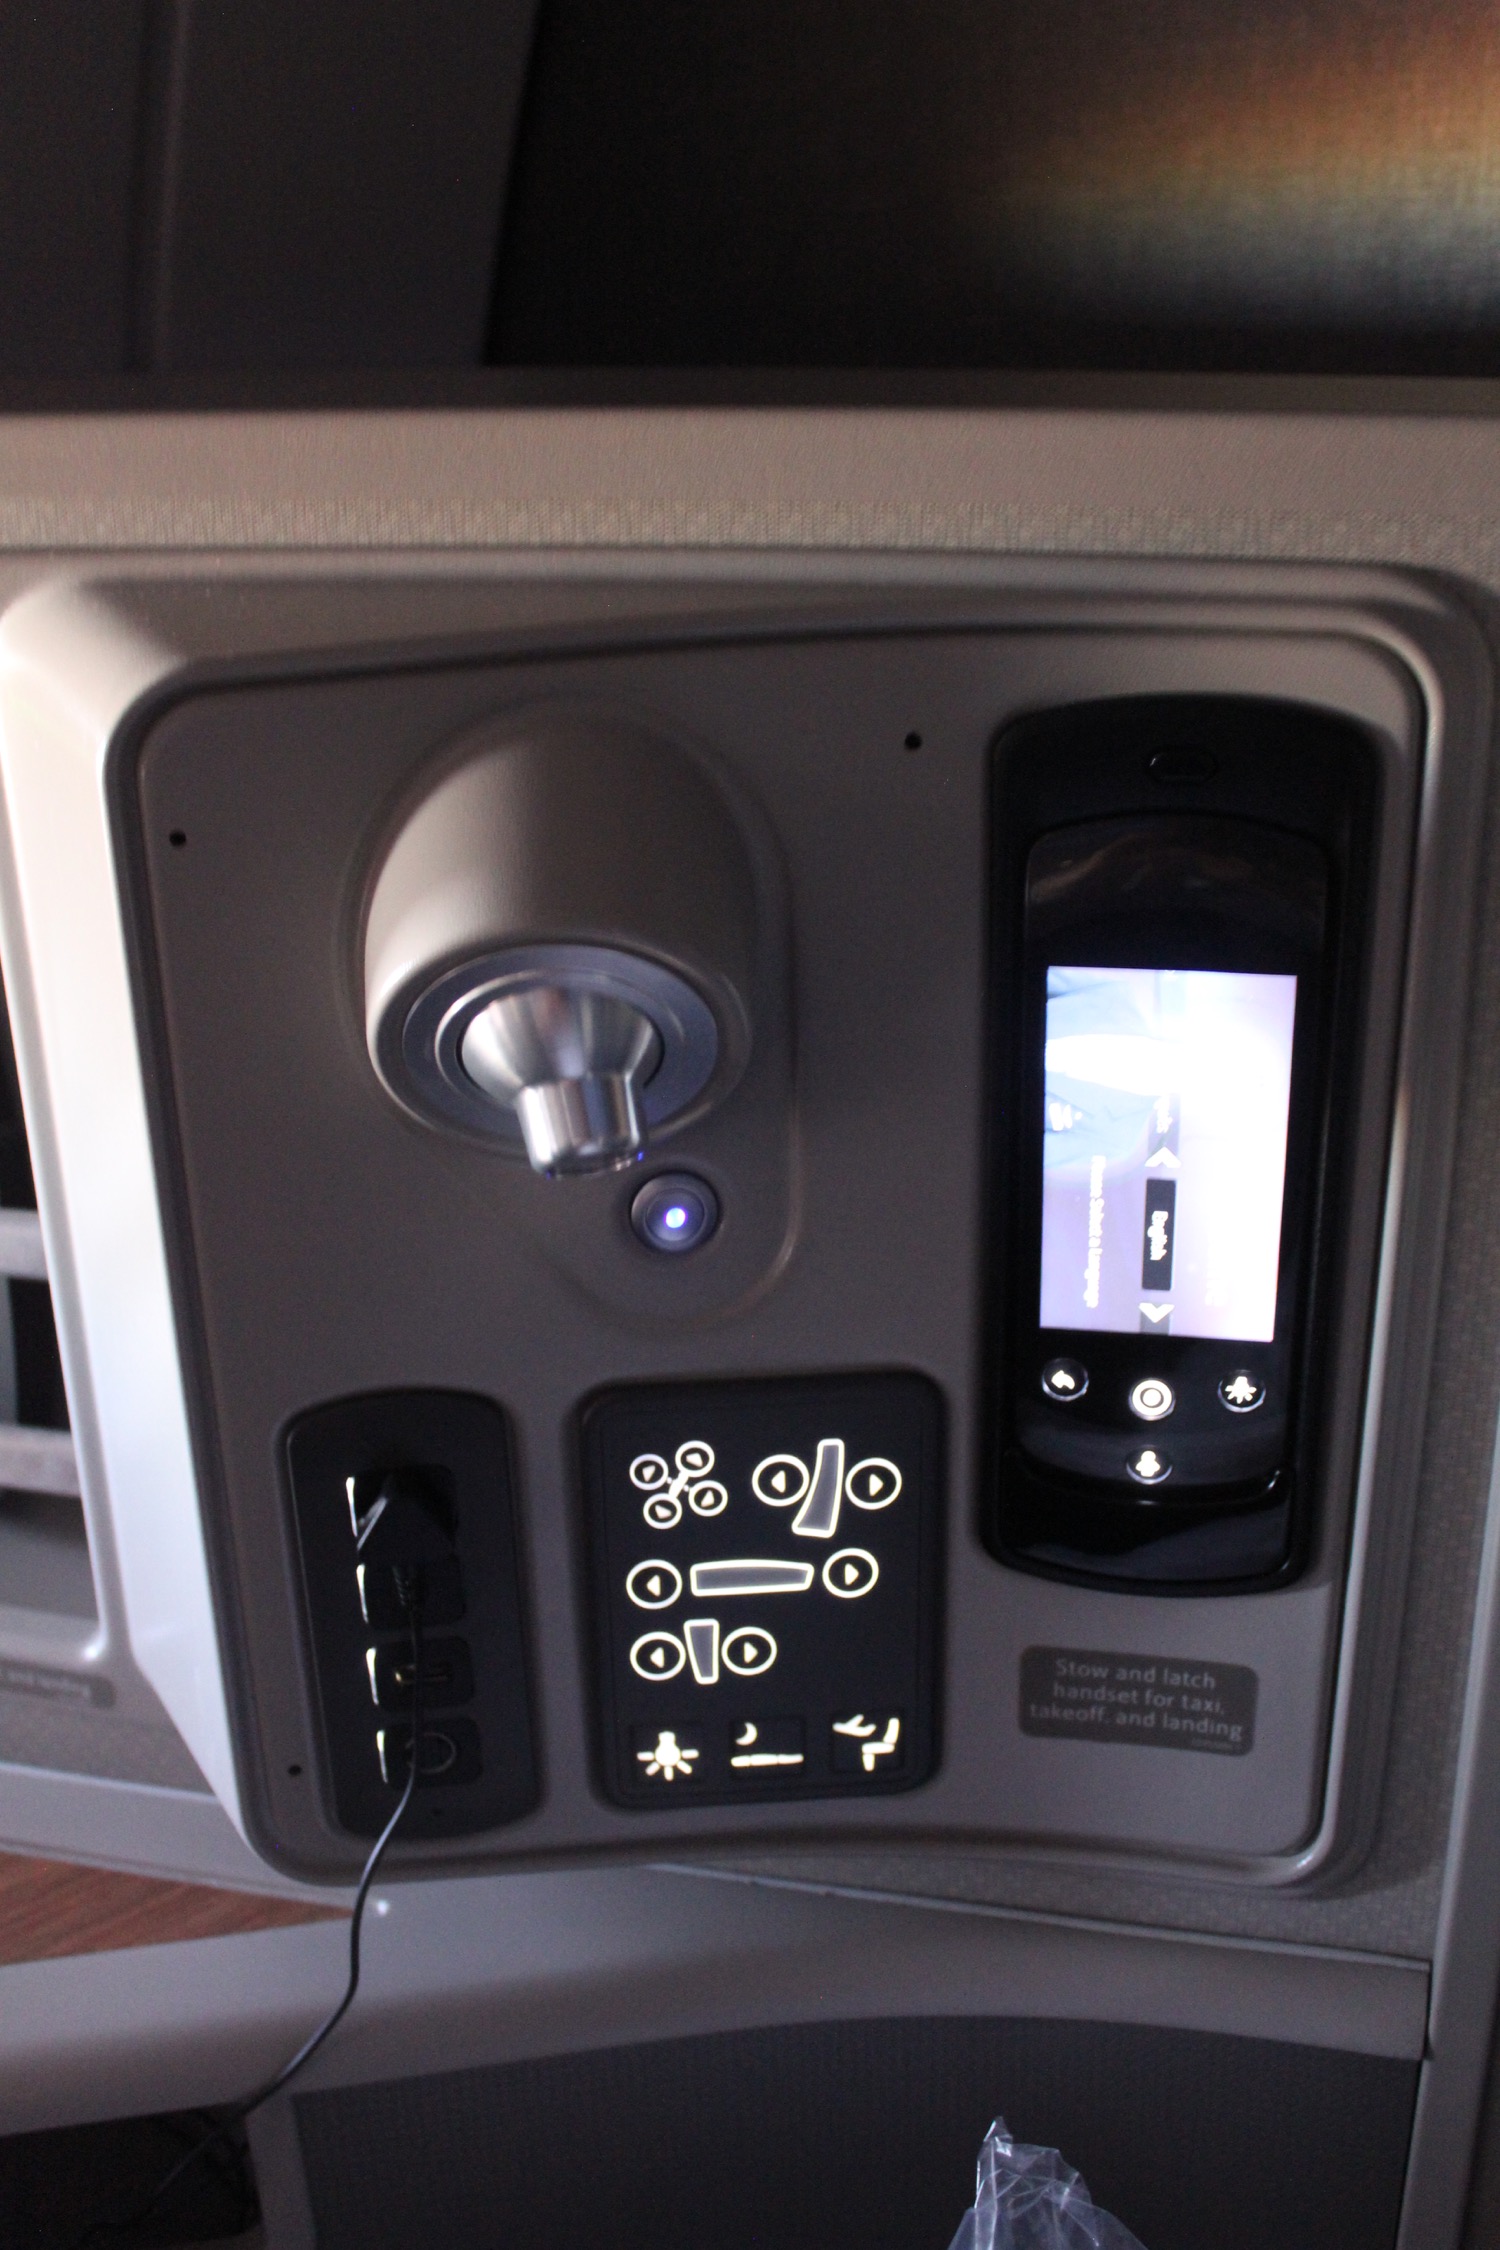 a phone and control panel on a vehicle